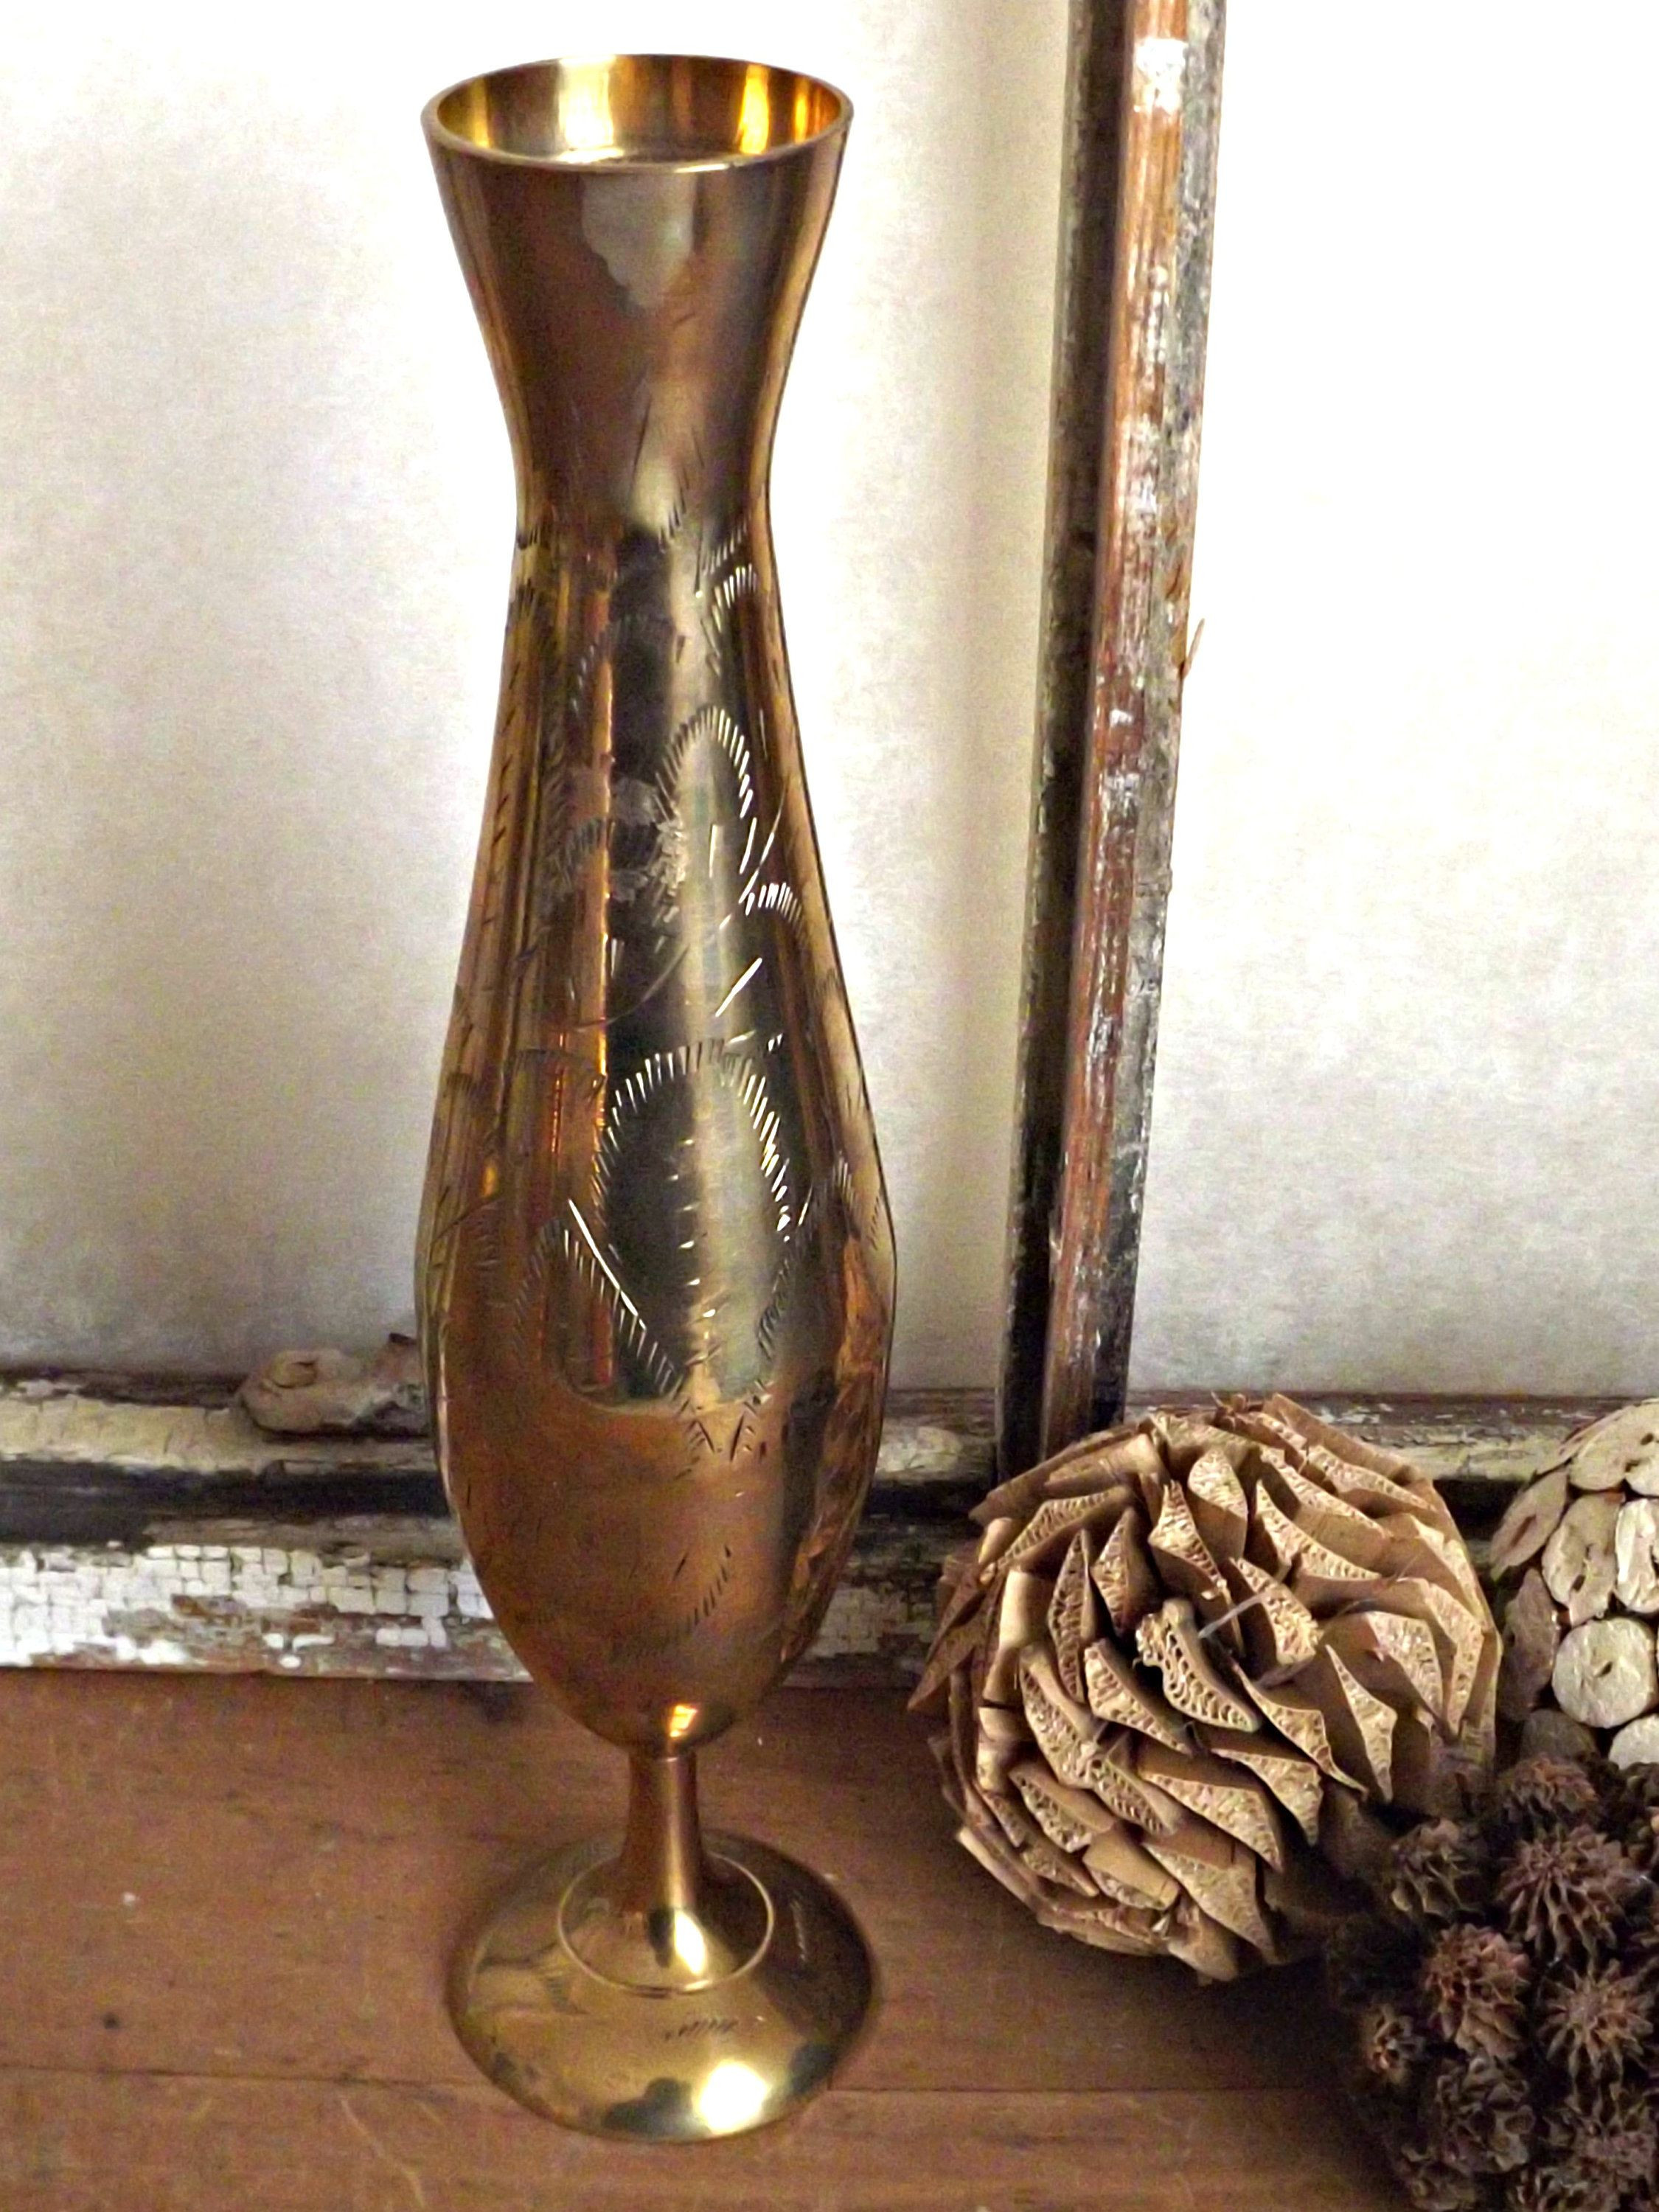 antique brass vase made in india of solid brass vase boho decor etched brass vase retro brass decor regarding solid brass vase boho decor etched brass vase retro bass decor vintage